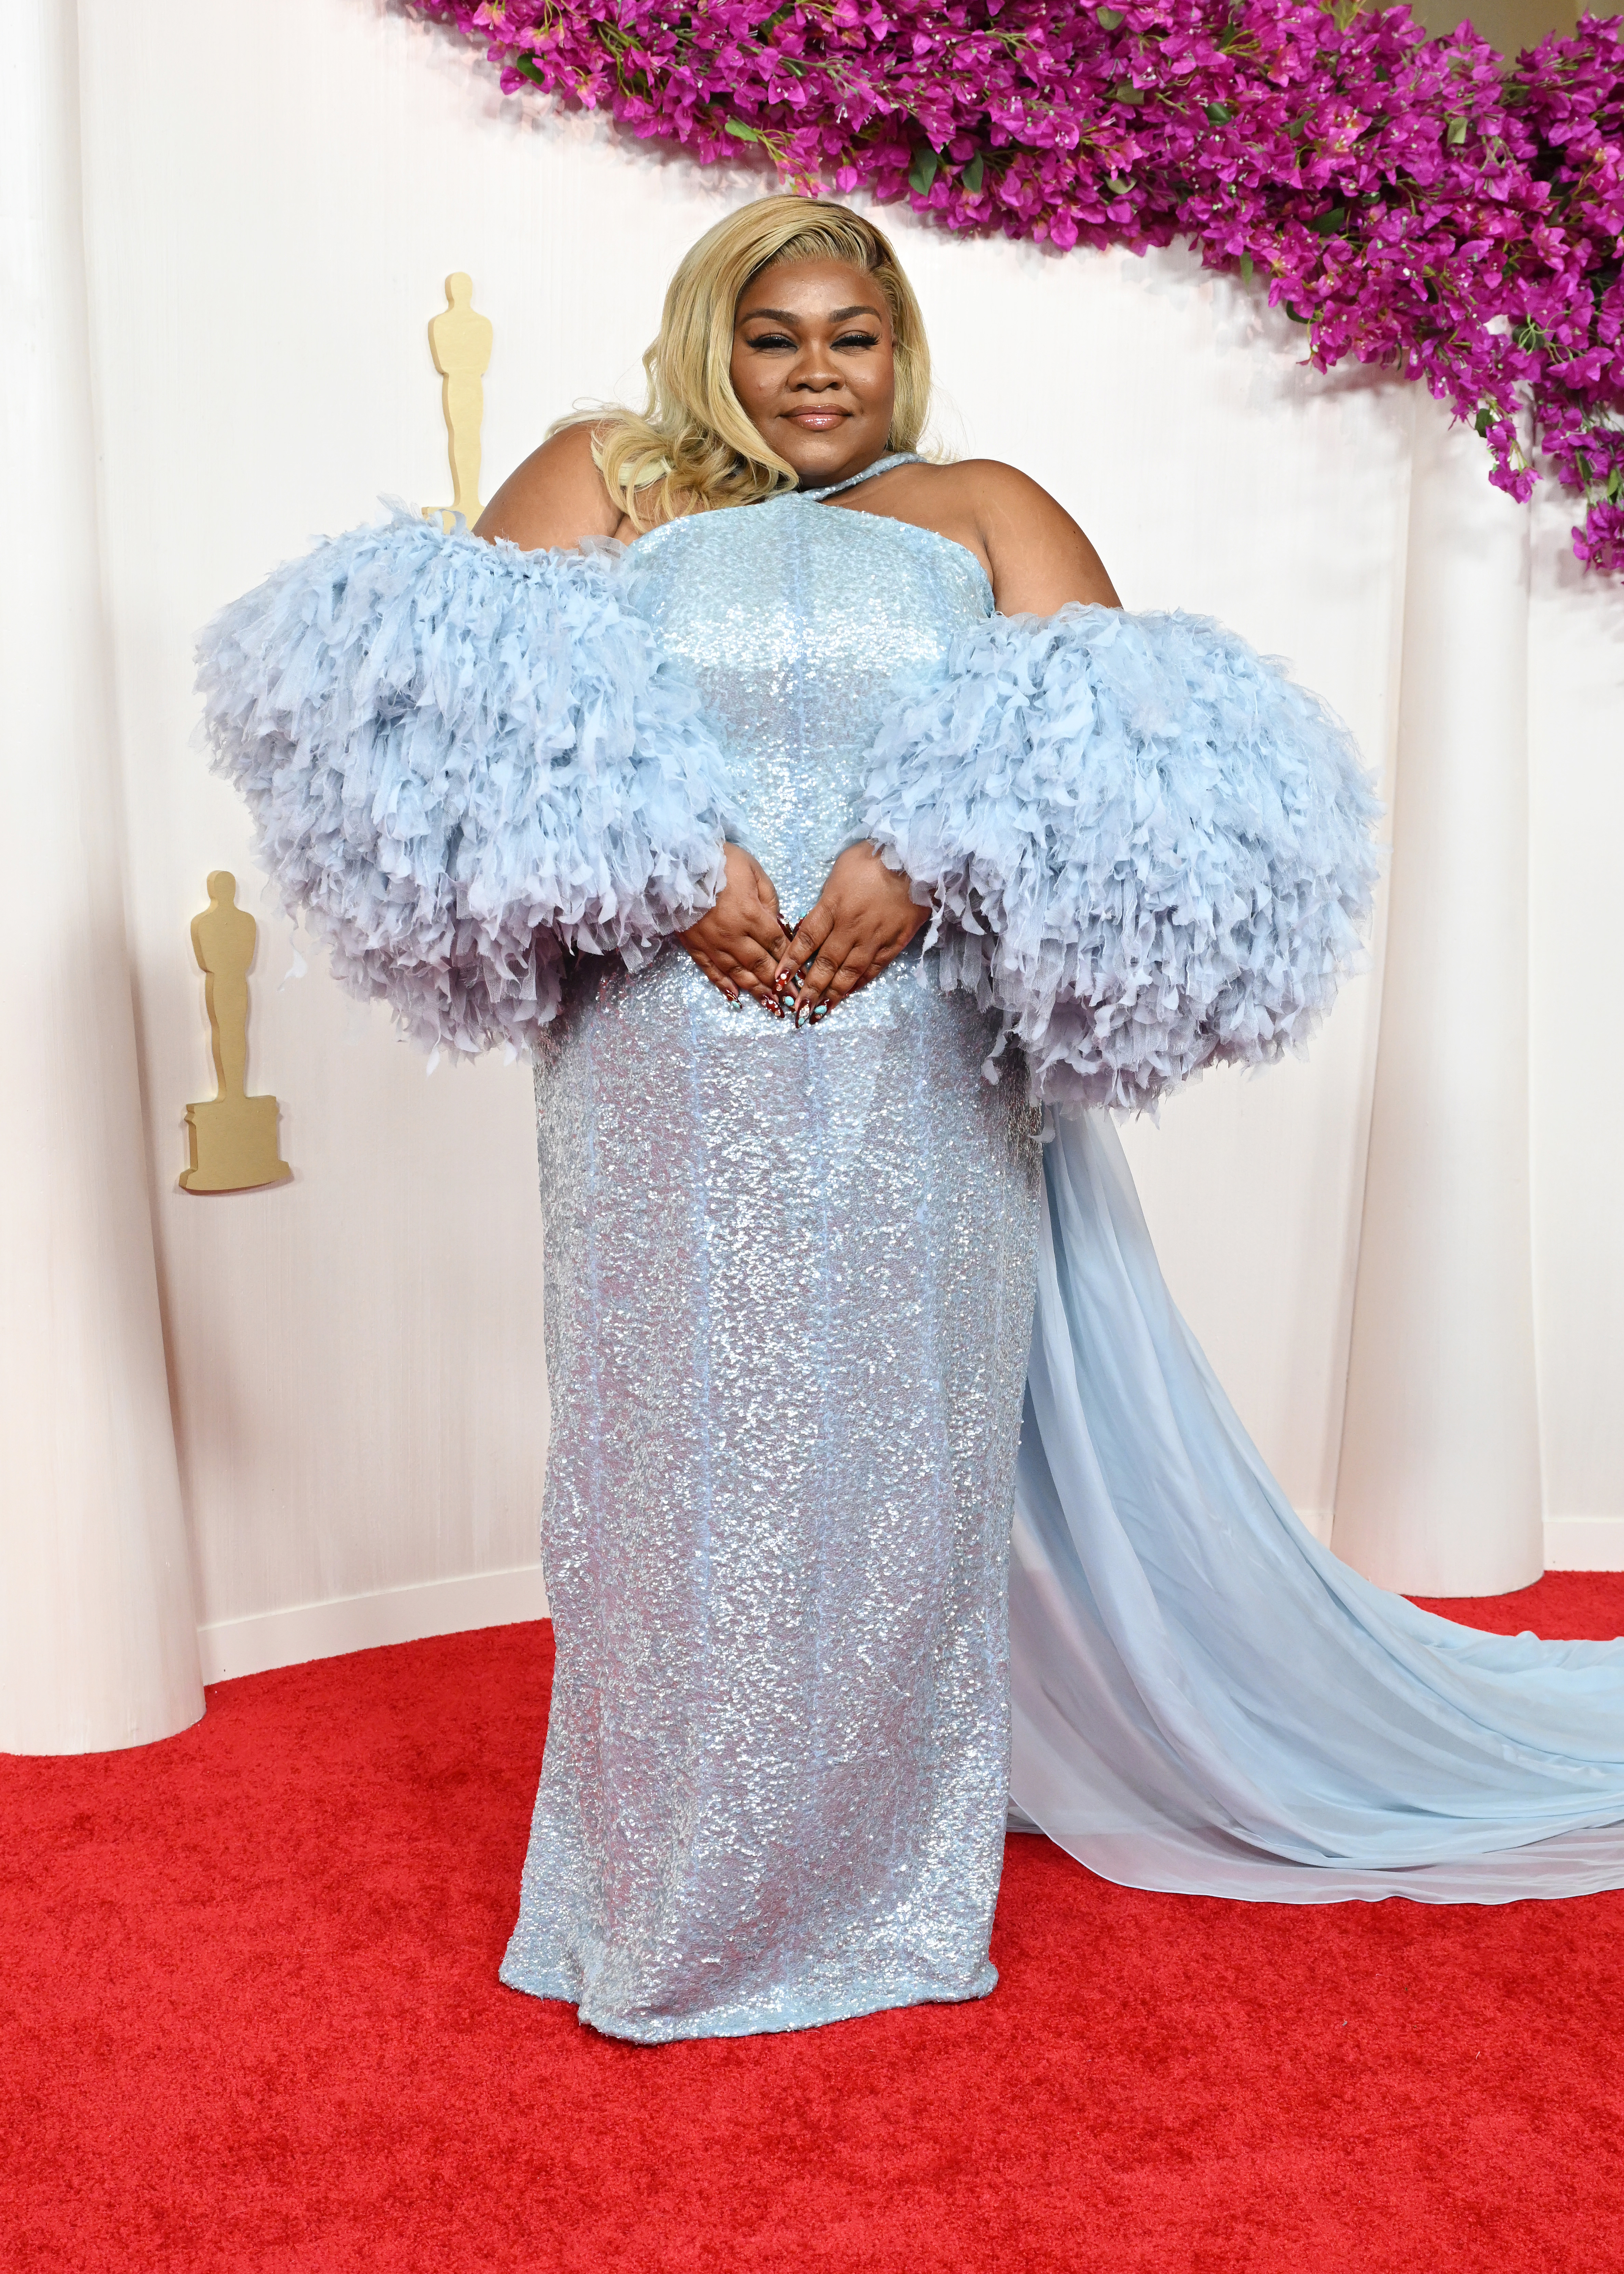 Da’Vine in a sequined gown with tulle sleeves on the red carpet